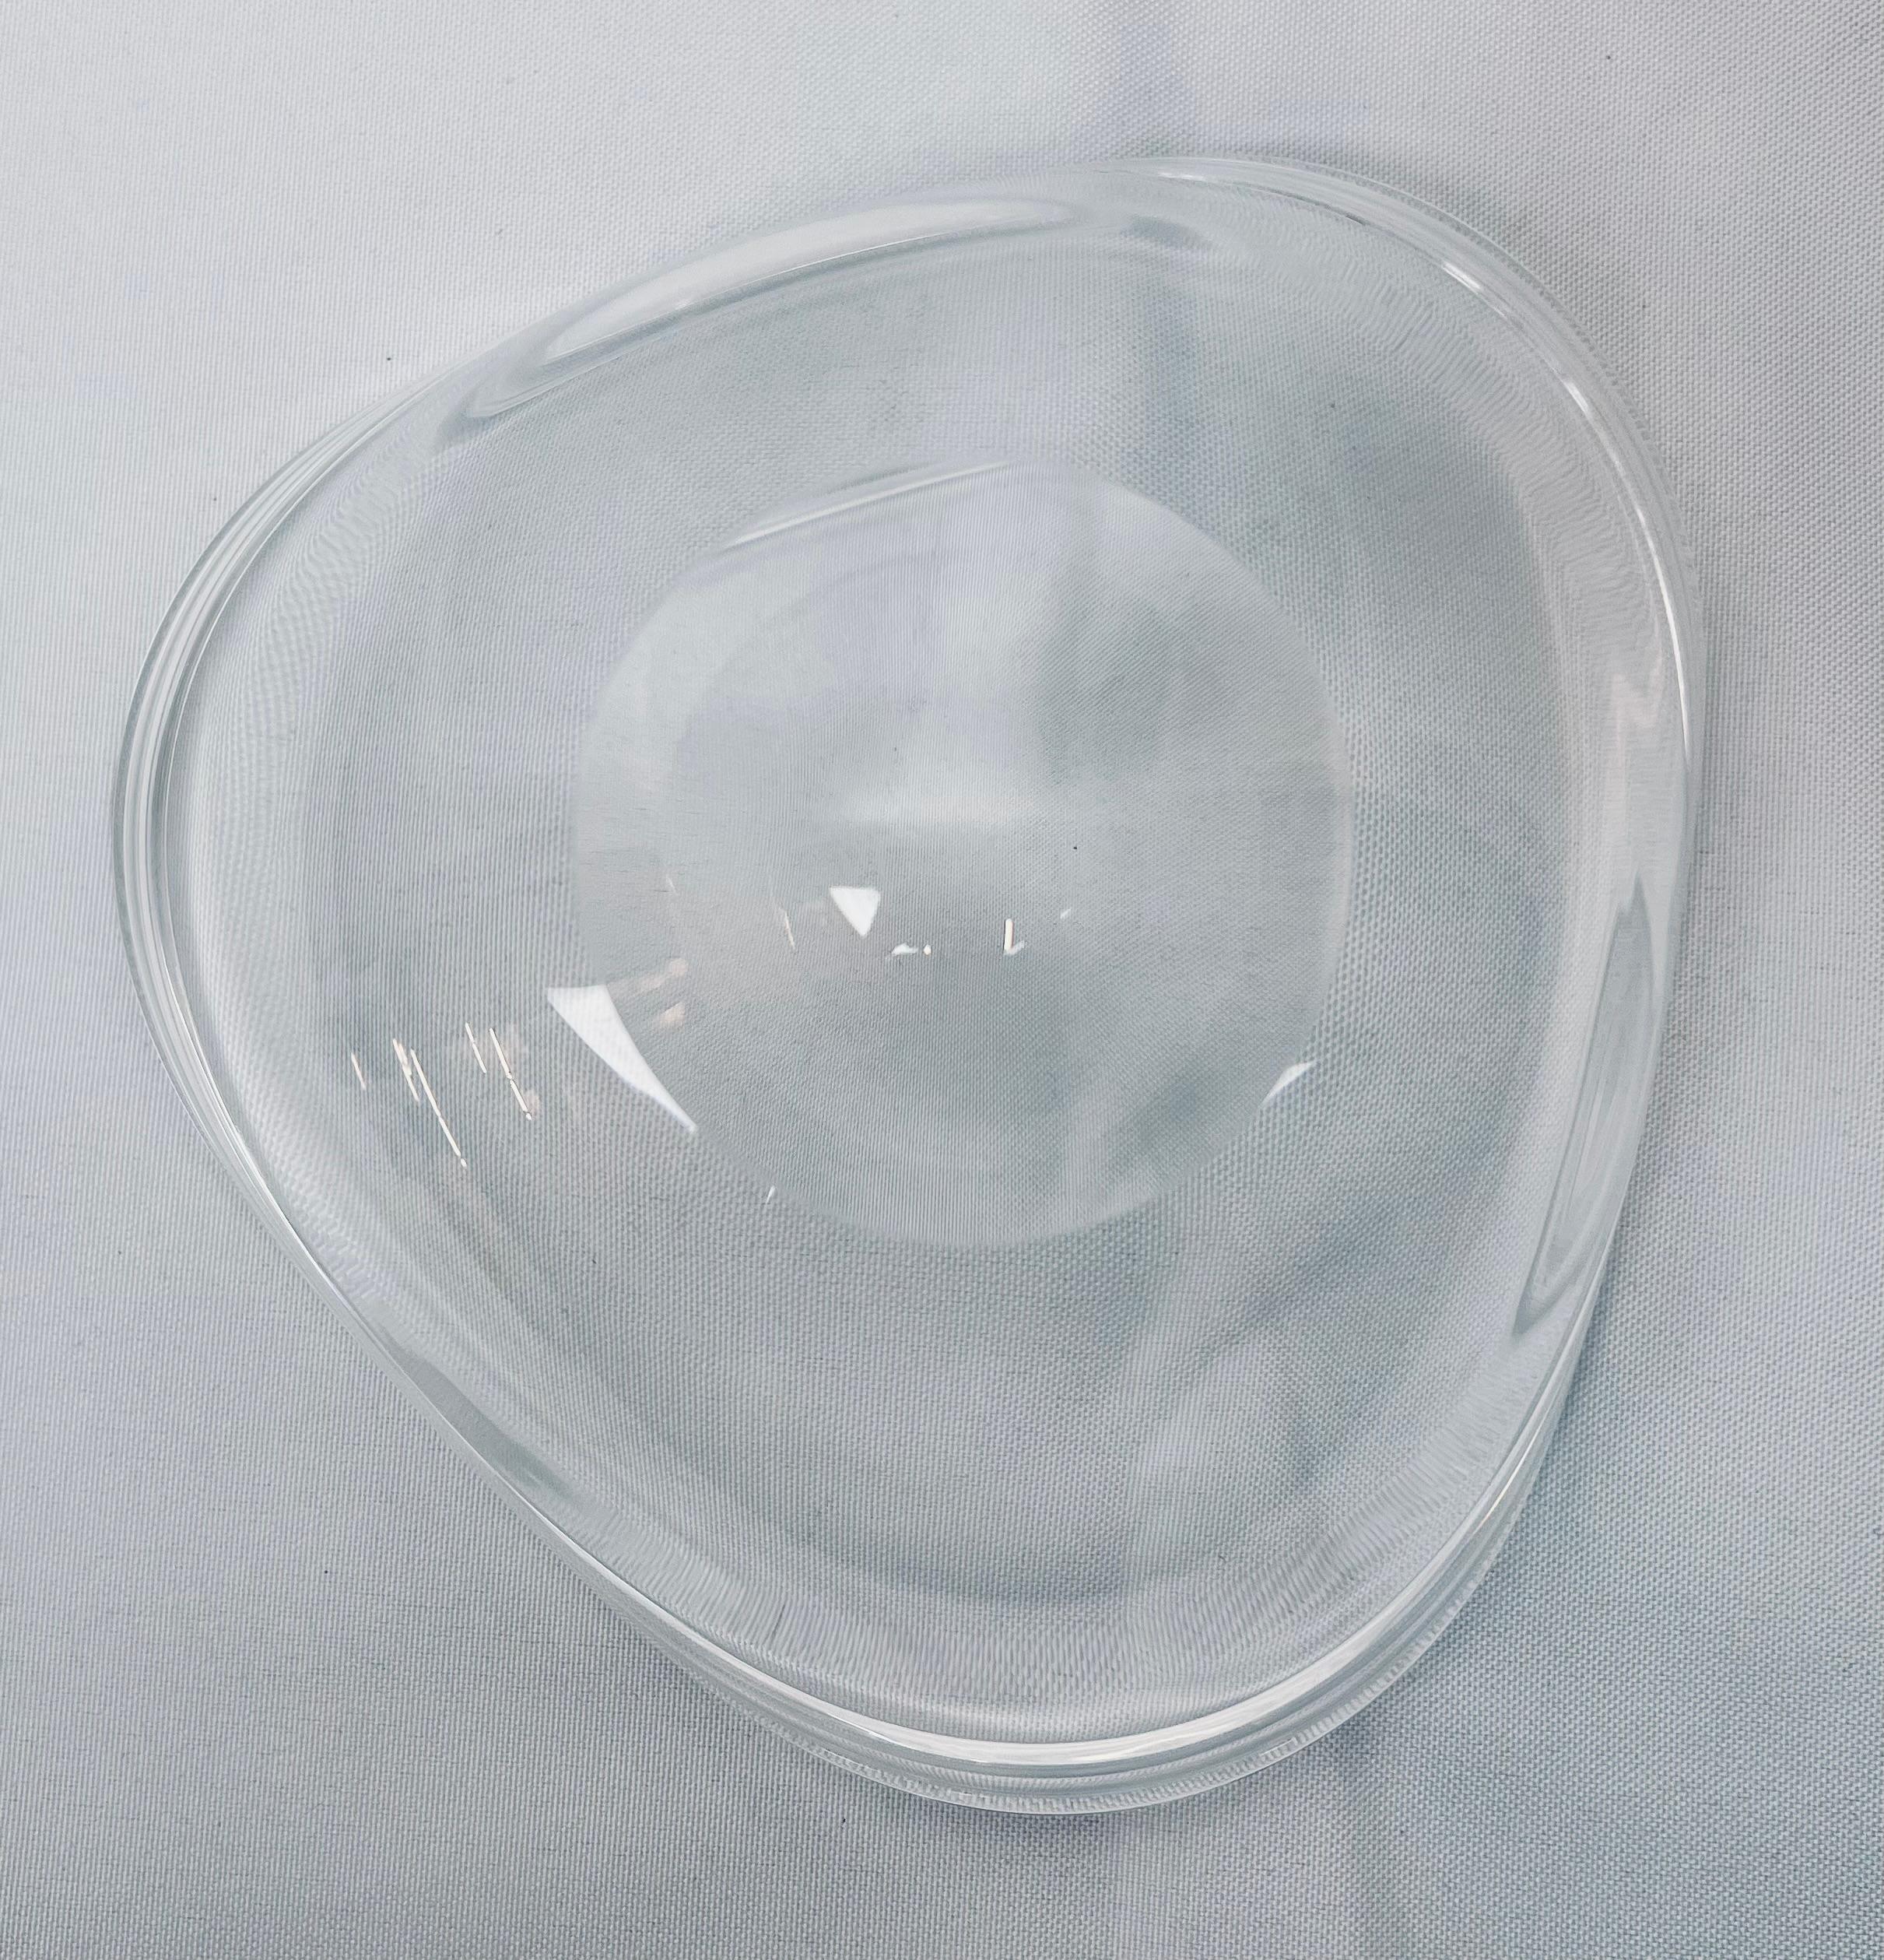 Mid-Century Modern Steuben Clear Glass Bowl with a Wavy Rolled over Edge-Scribe Signed 